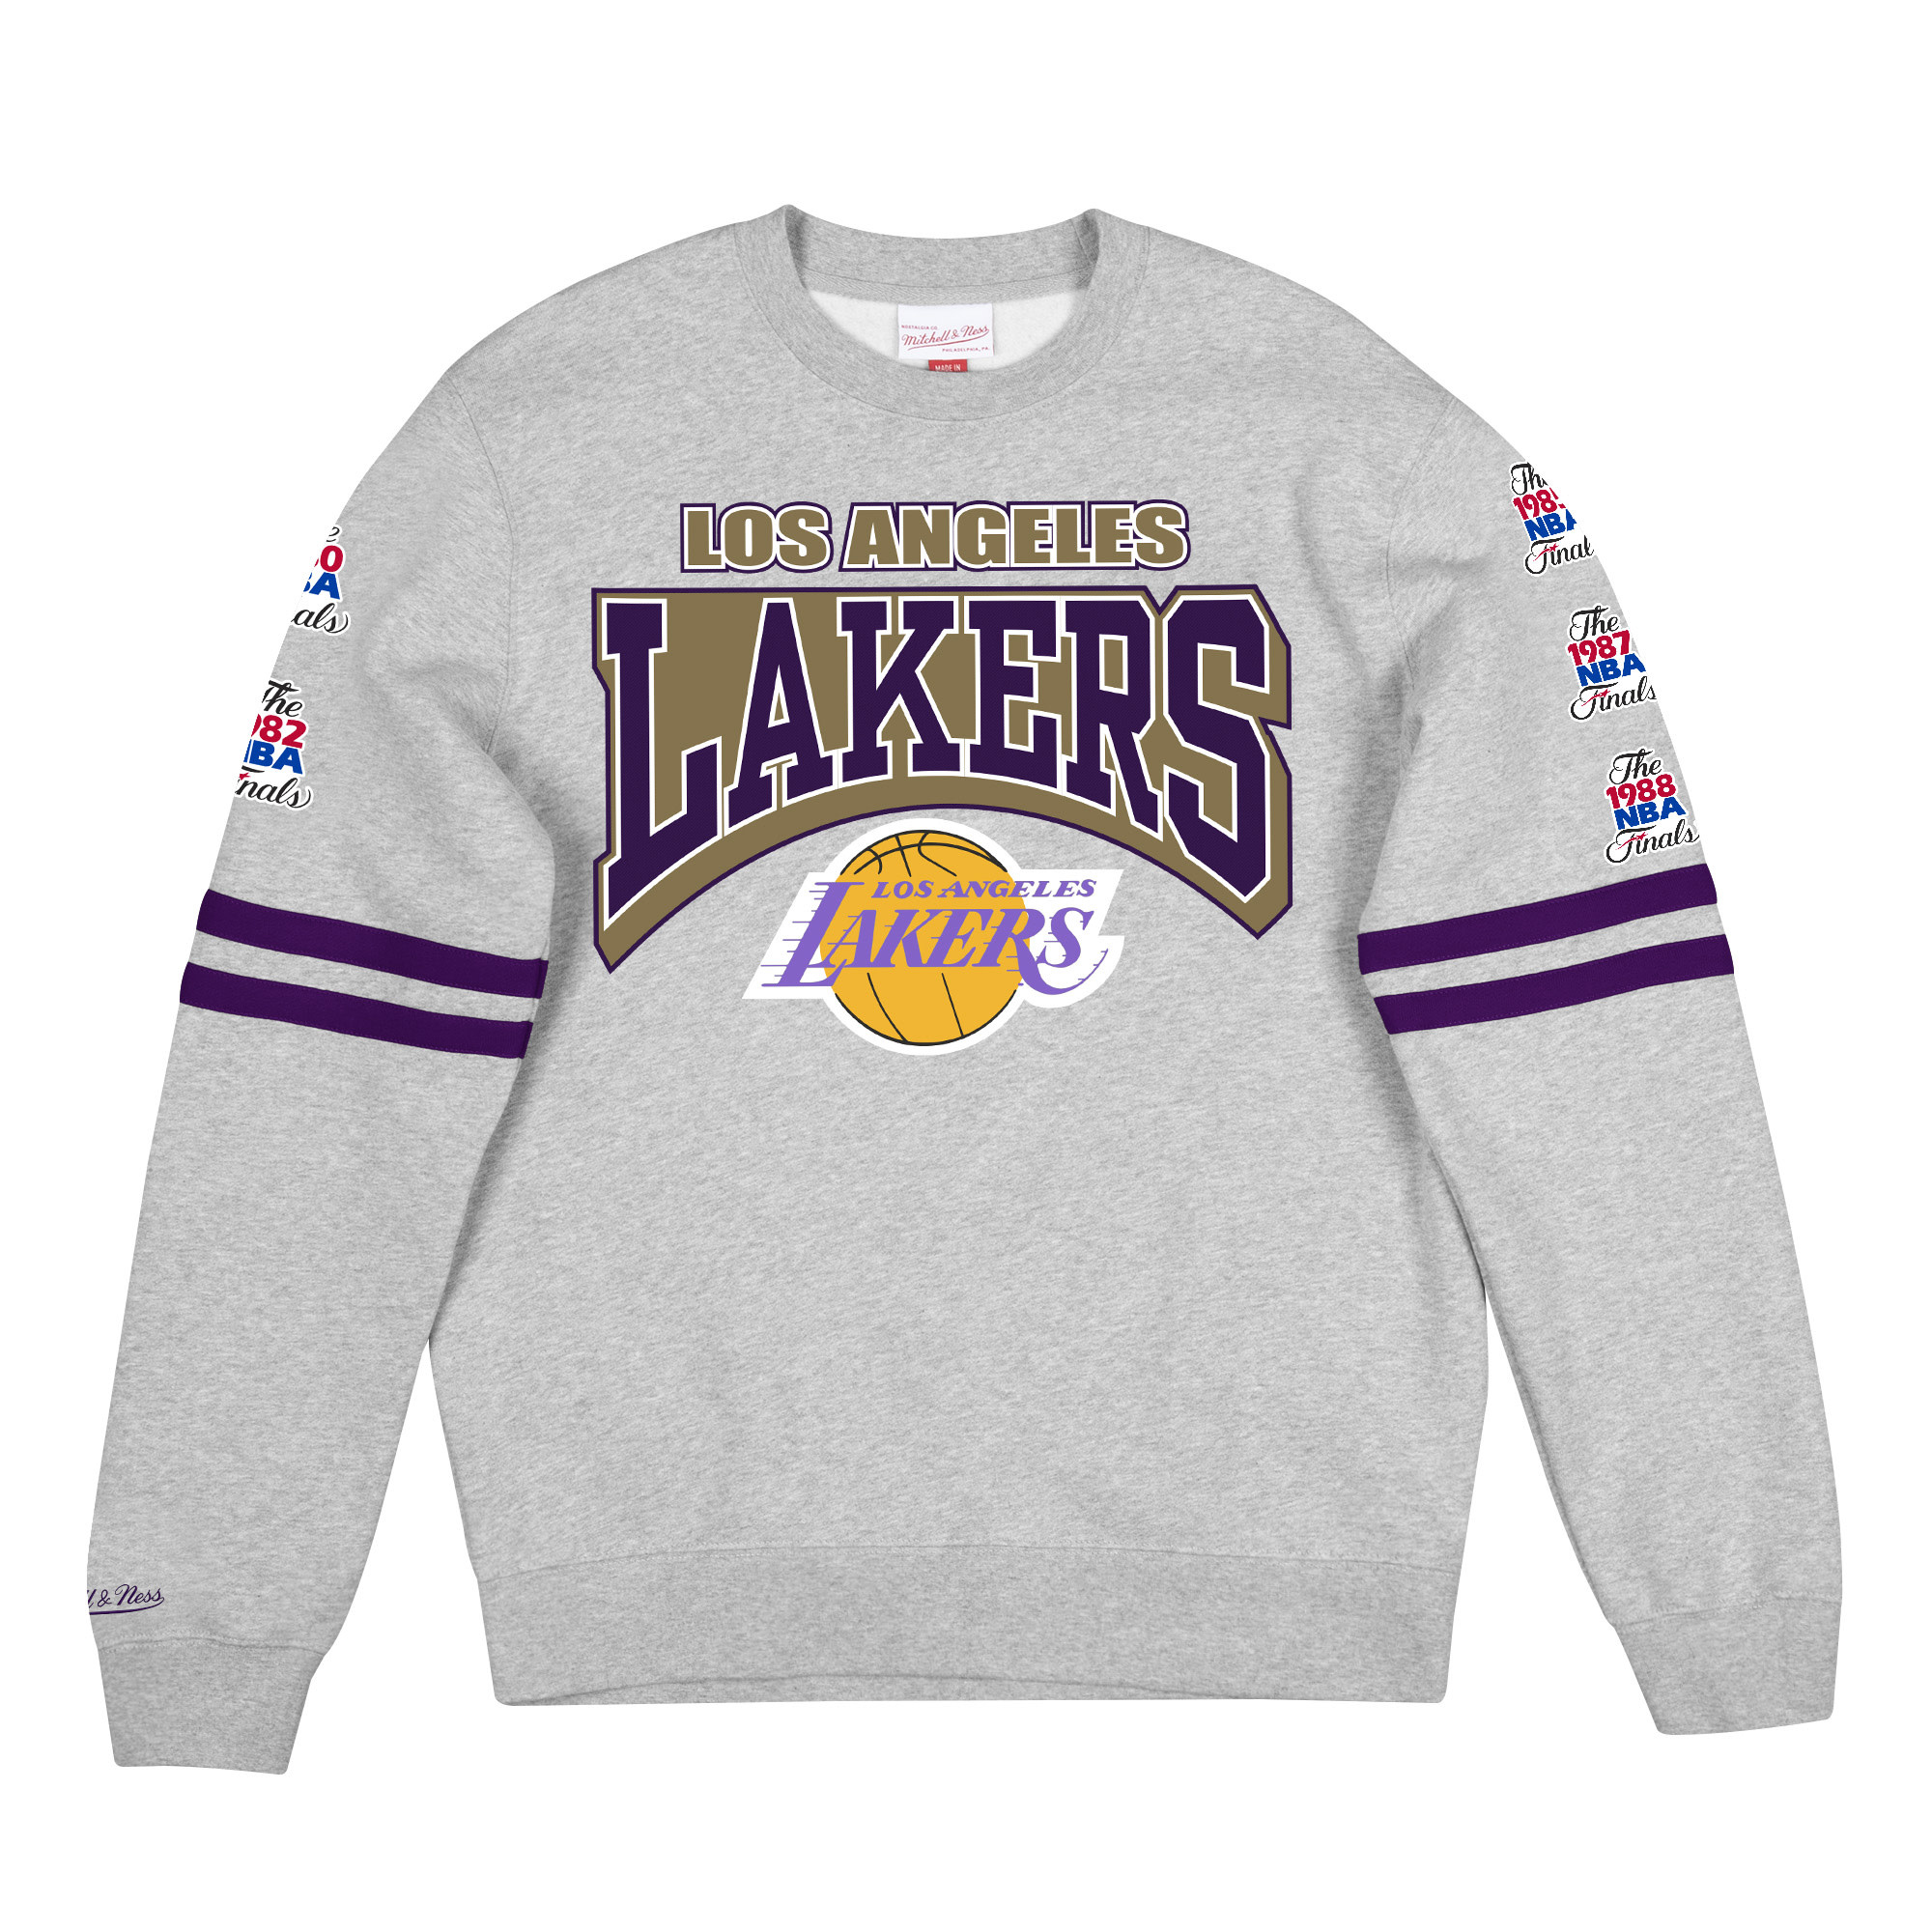 Los Angeles Lakers 1987 Champions Lakers T-Shirt By Mitchell & Ness - Grey  - Mens